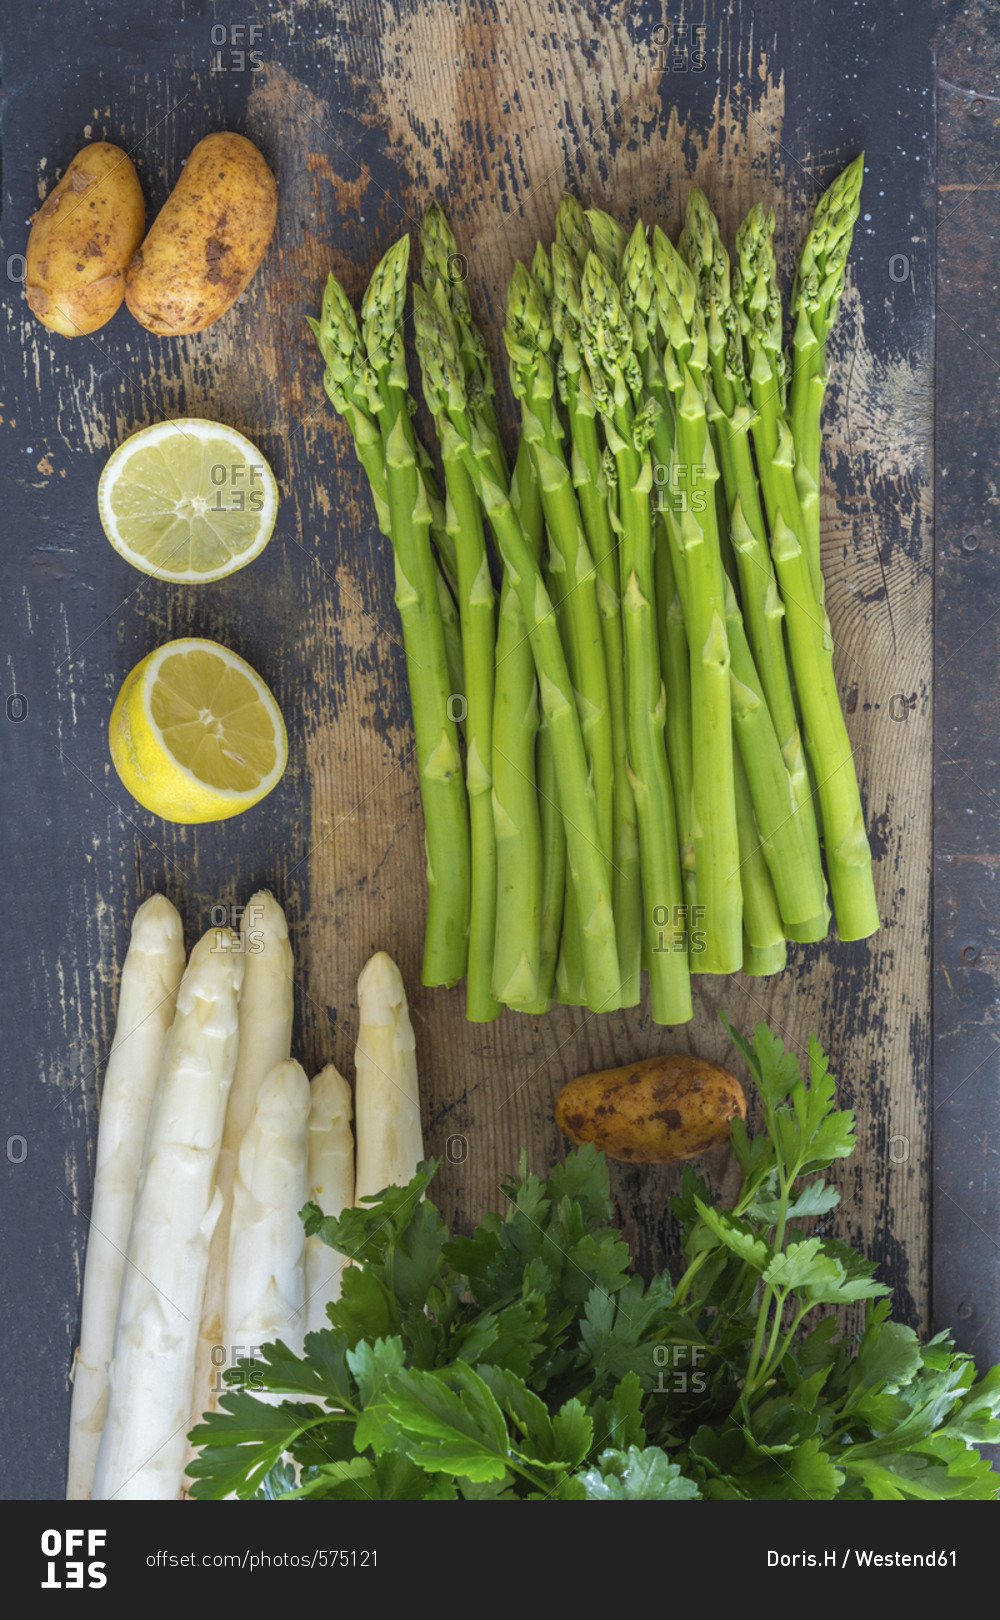 Green and white asparagus- potatoes- sliced lemon and flat leaf parsley on wood